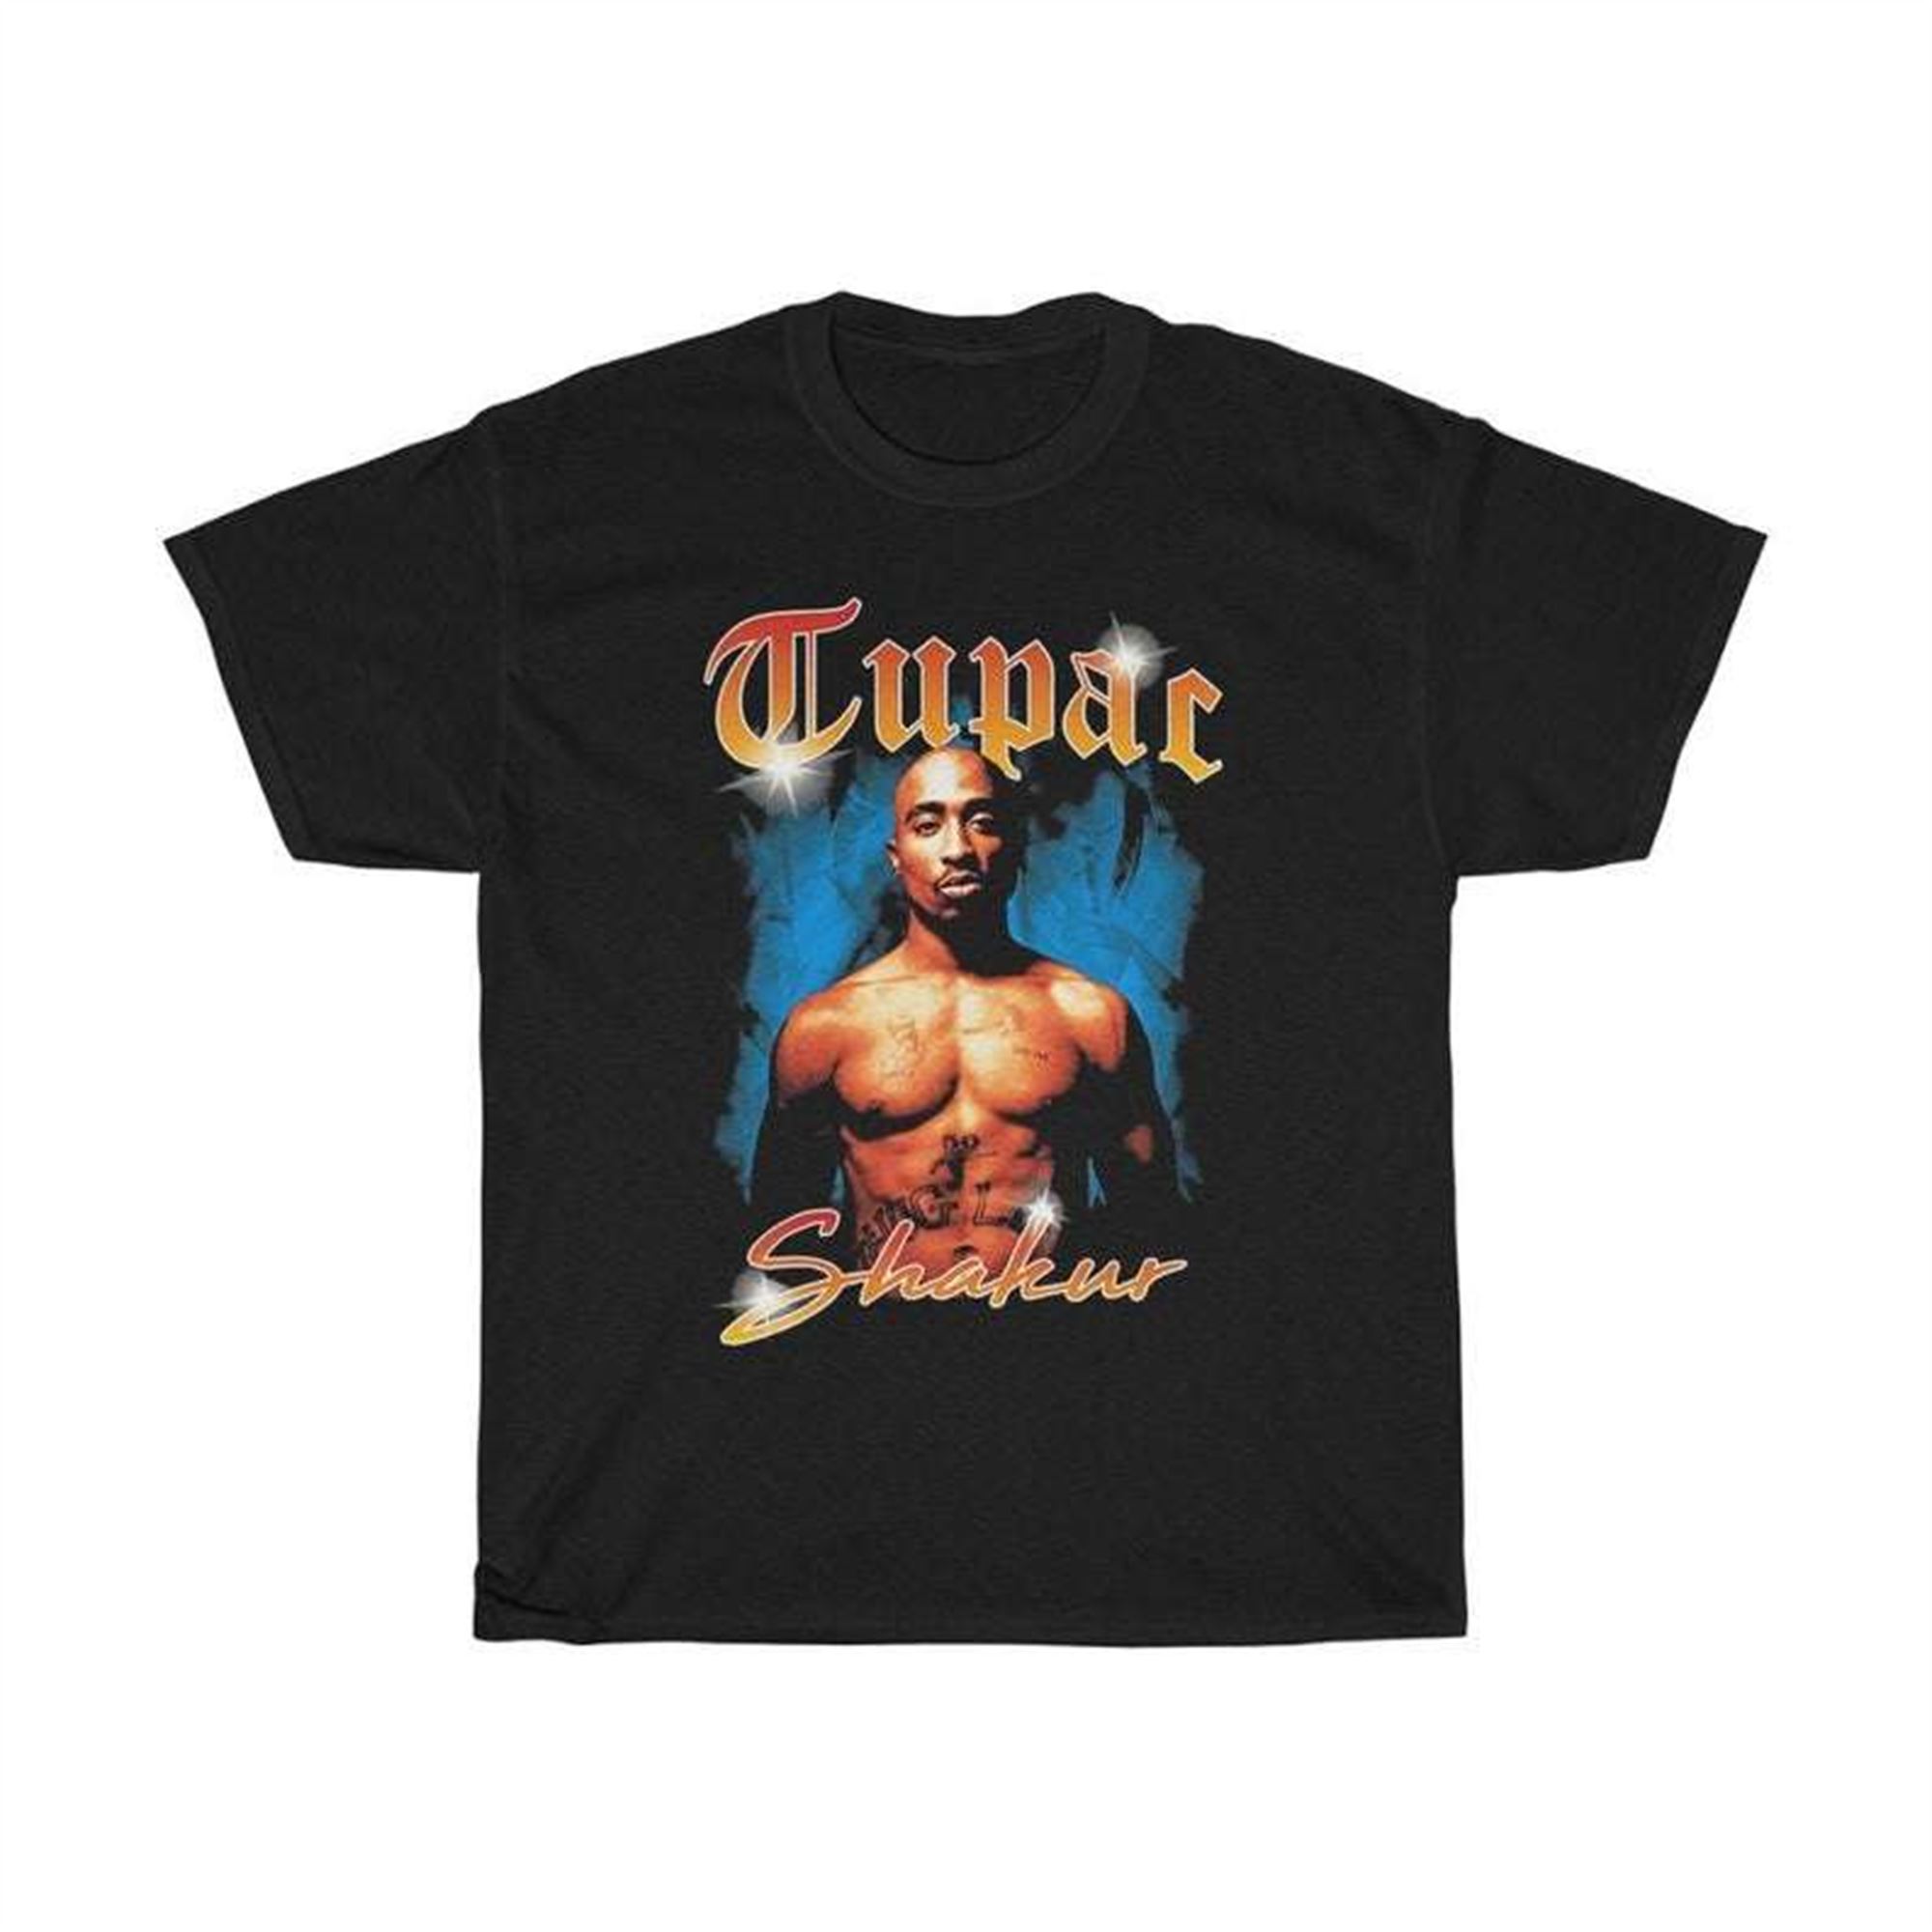 Tupac Retro 2pac Vintage T Shirt Full Size Up To 5xl